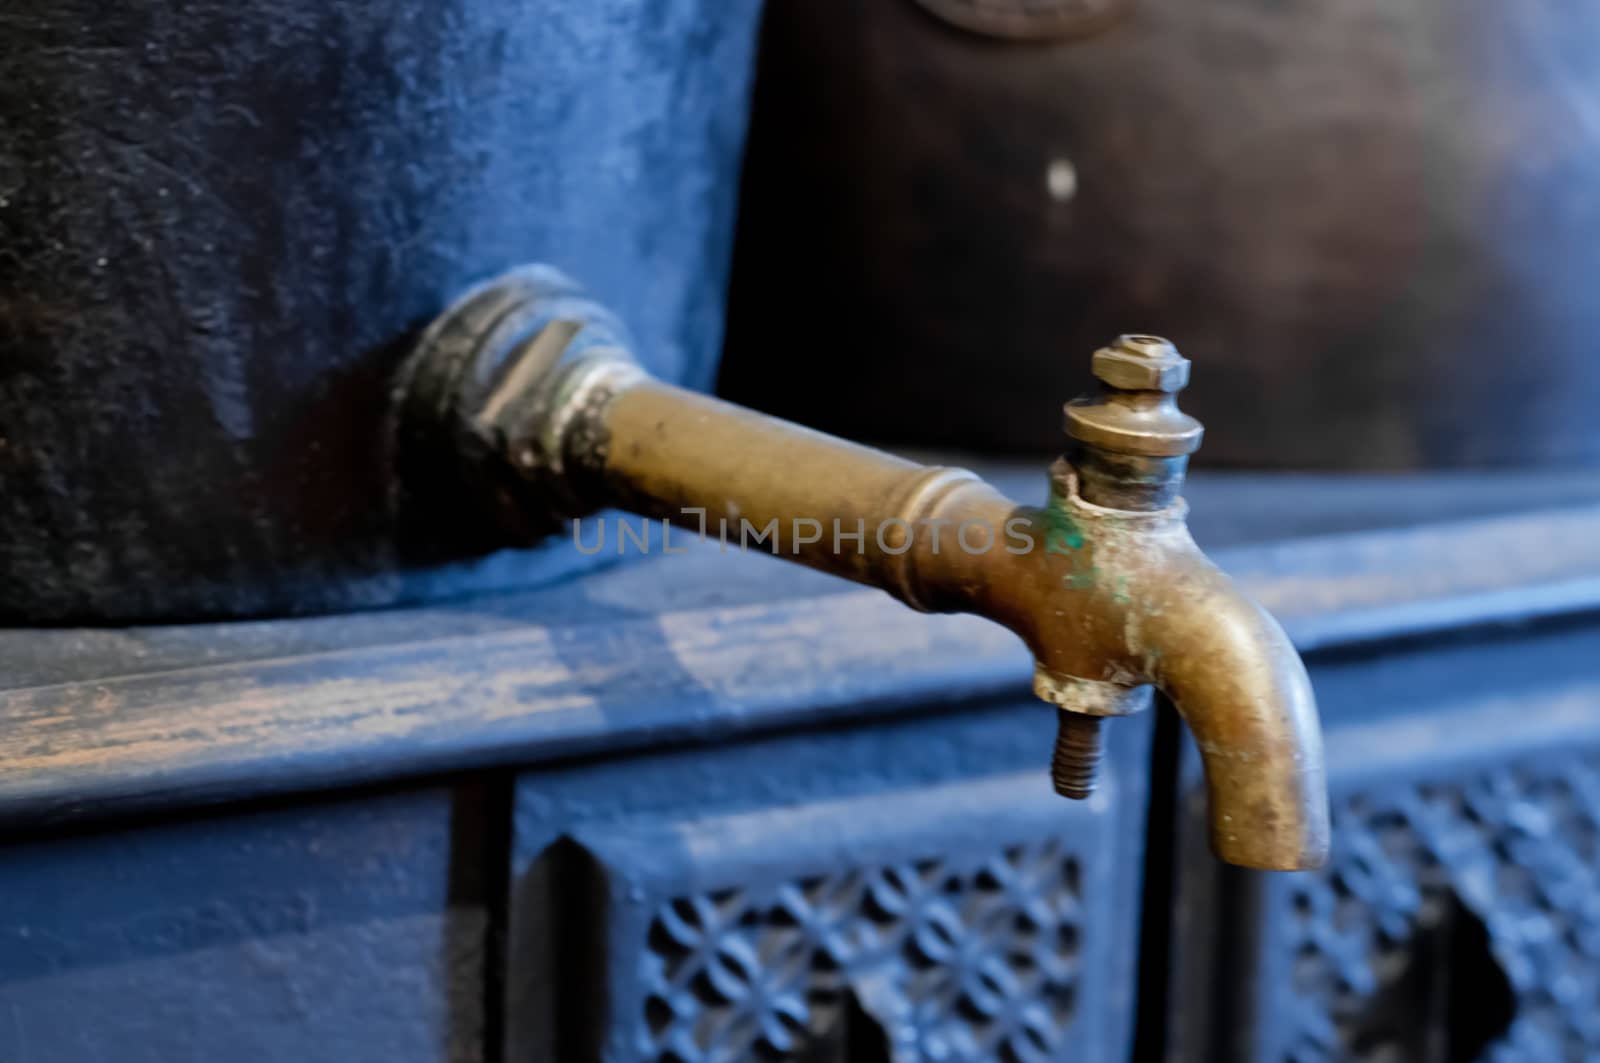 Classic golden brass old vintage water tap by eyeofpaul